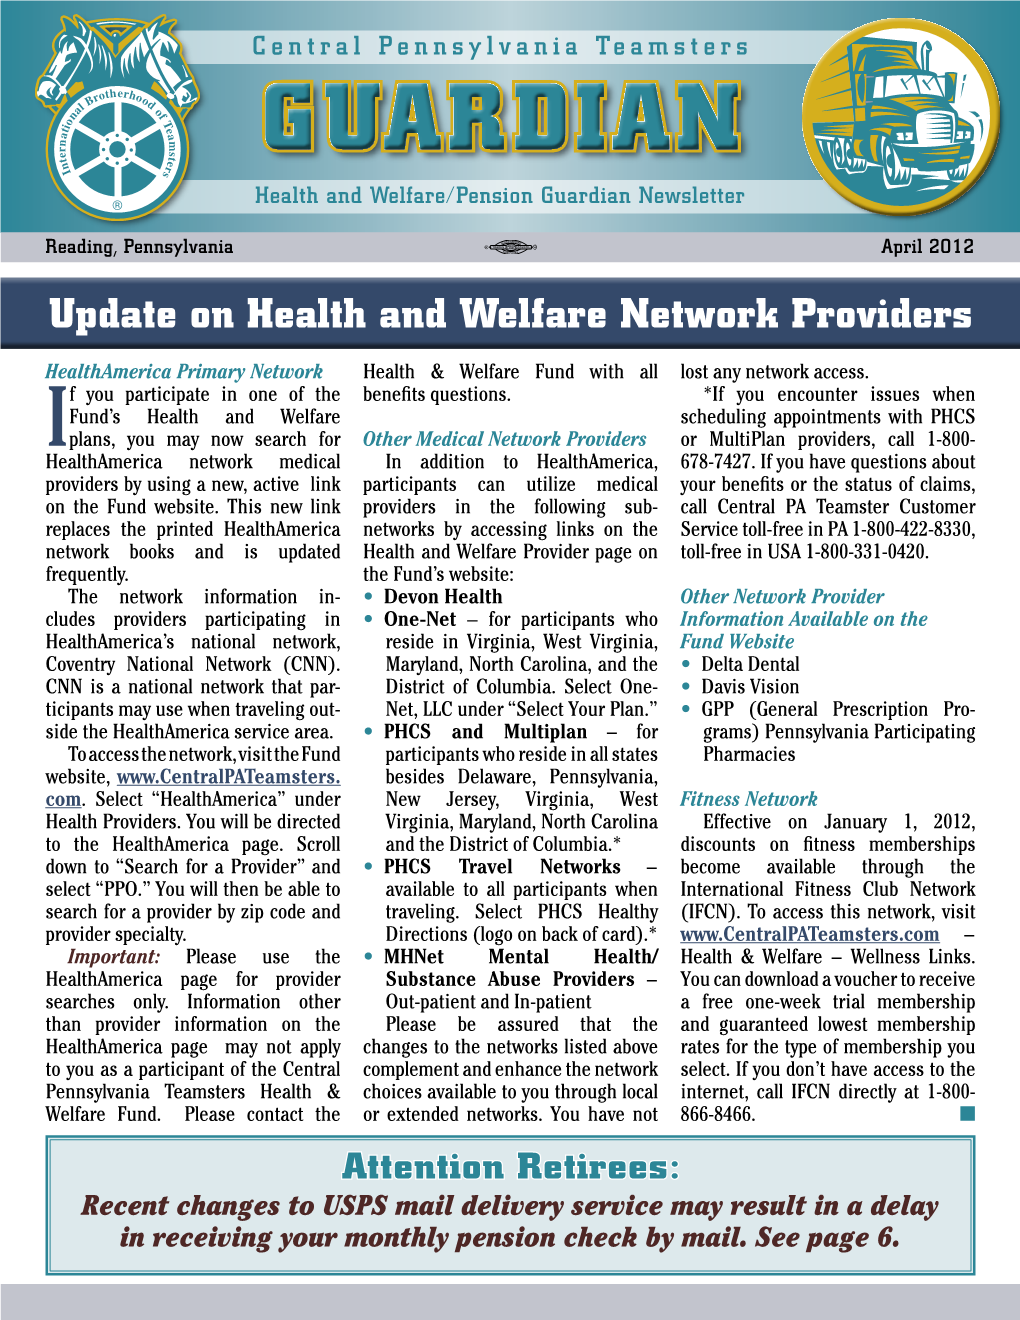 Central Pennsylvania Teamsters GUARDIAN Health and Welfare/Pension Guardian Newsletter ®